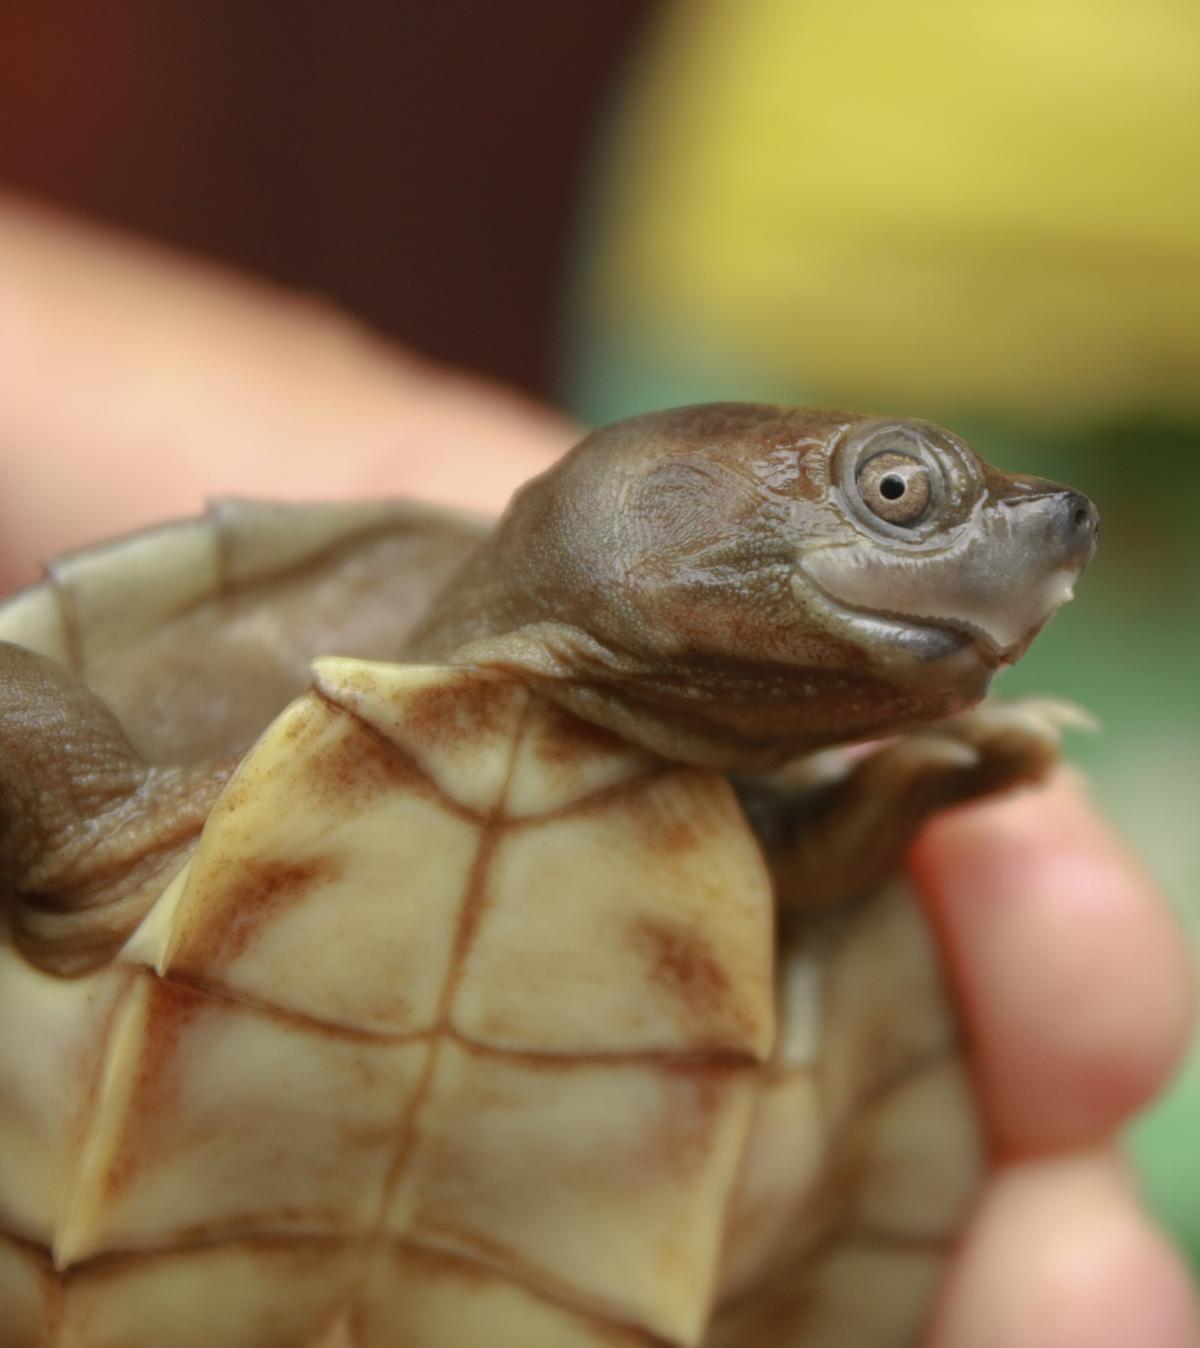 A closeup of a Burmese roofed turtle hatching (<a href="https://newsroom.wcs.org/News-Releases/articleType/ArticleView/articleId/14807/PHOTO-RELEASE-The-Turtle-that-Almost-Went-Extinct-Now-Ready-for-Its-Close-up.aspx">Myo Min Win</a>/WCS Myanmar Program)